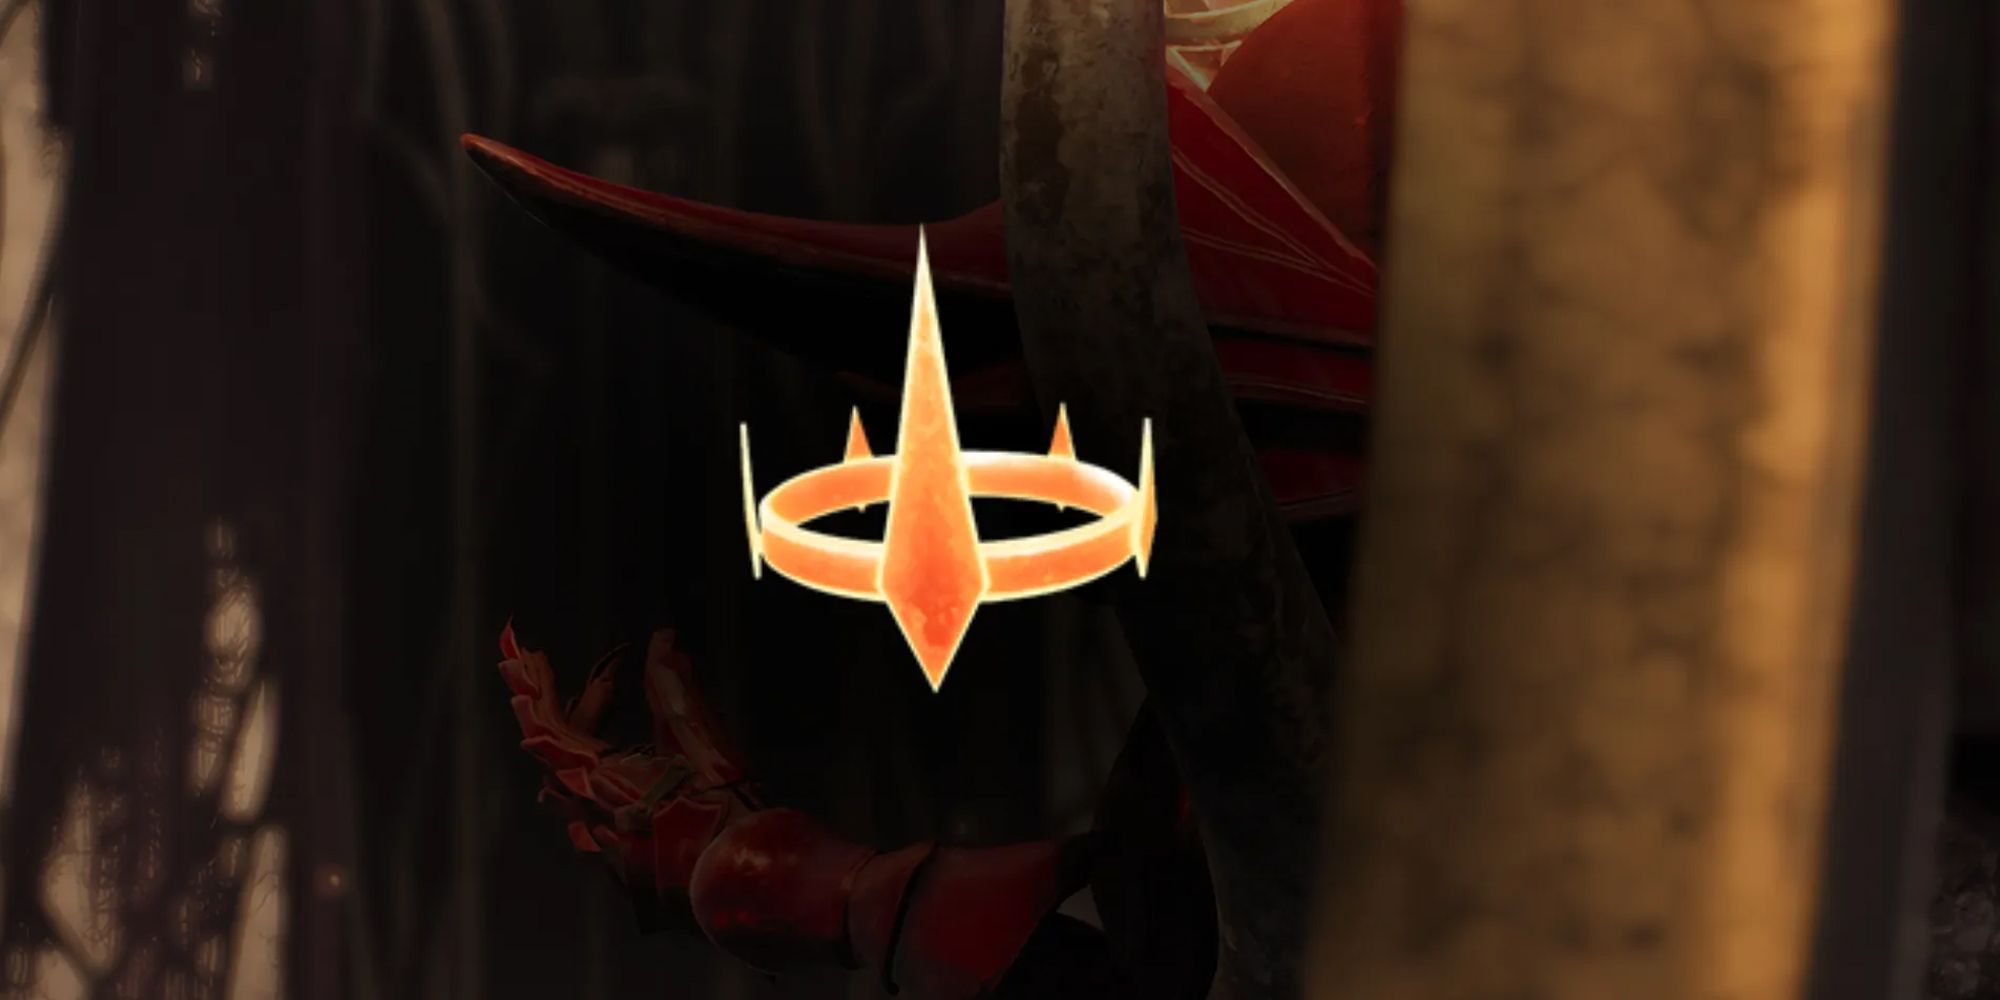 The Crown of the Red Prince overlaid on an image of the Red Prince from Remnant 2